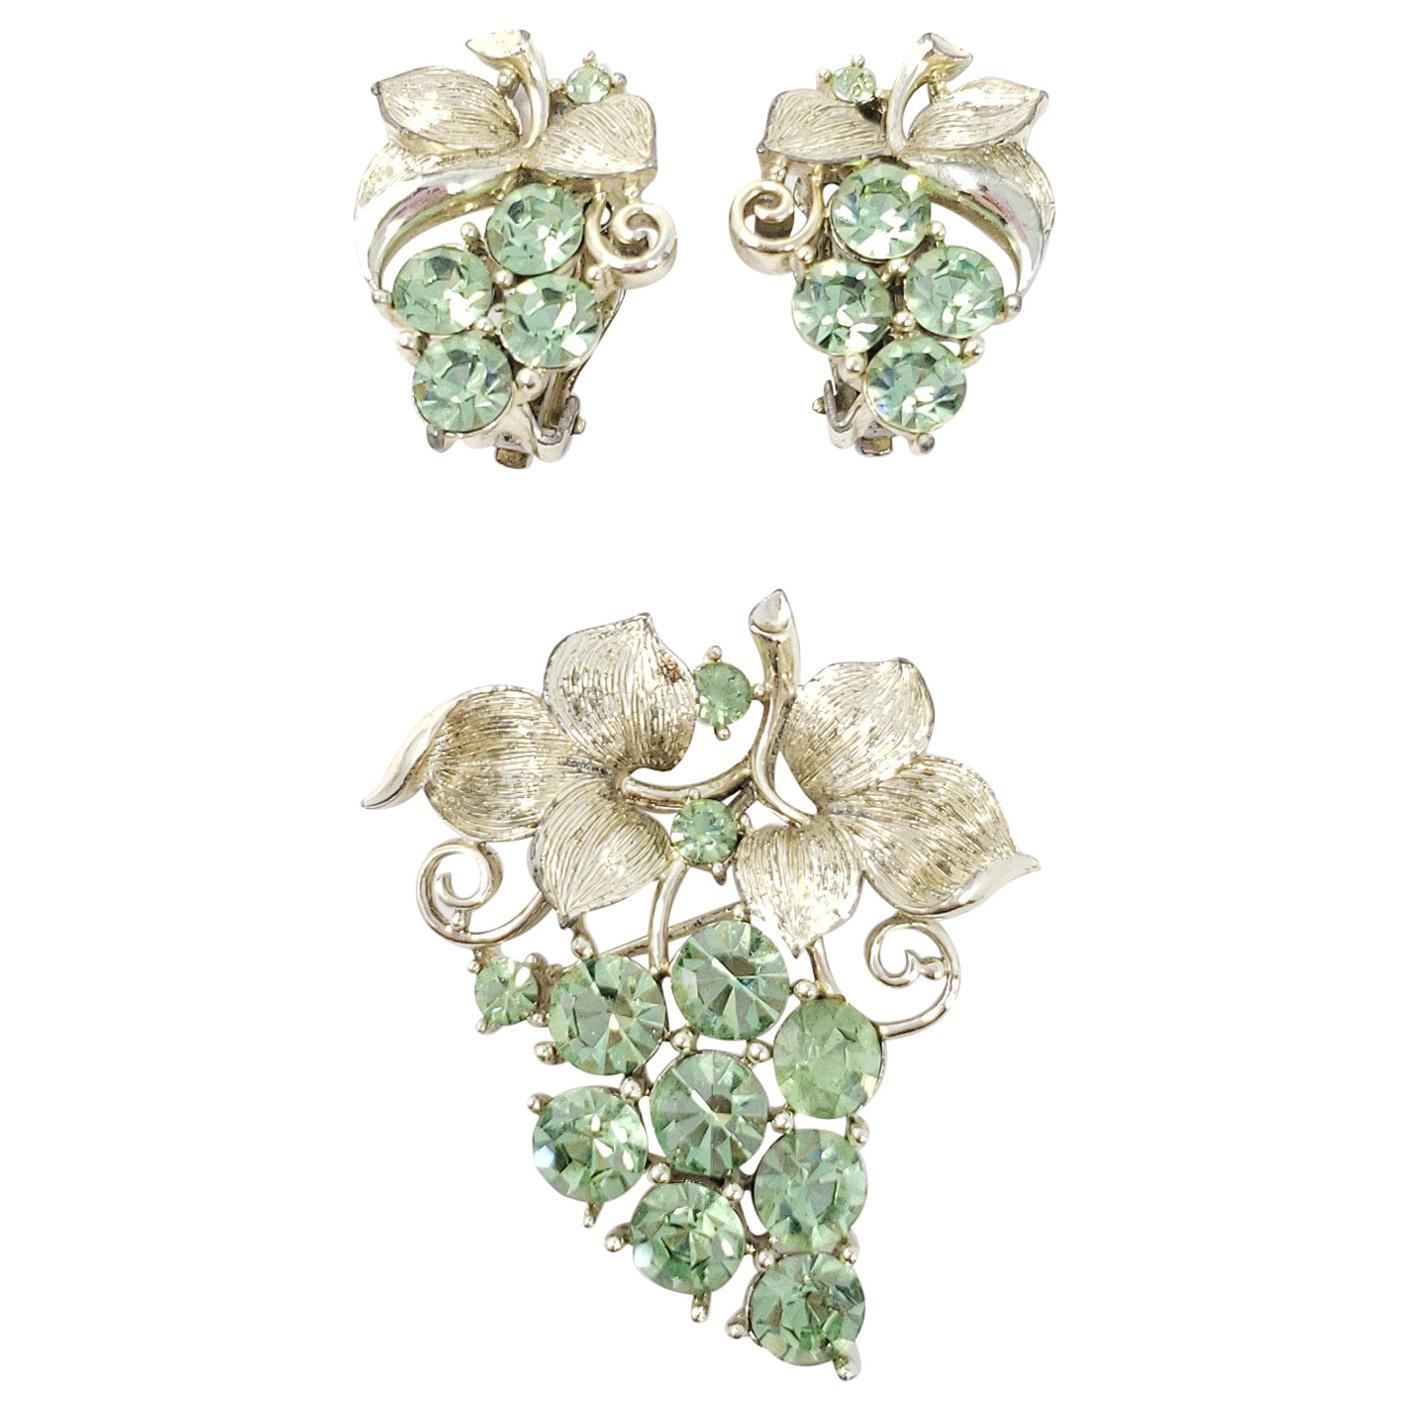 Lisner White Gold Peridot Pin Brooch and Clip on Earrings Set